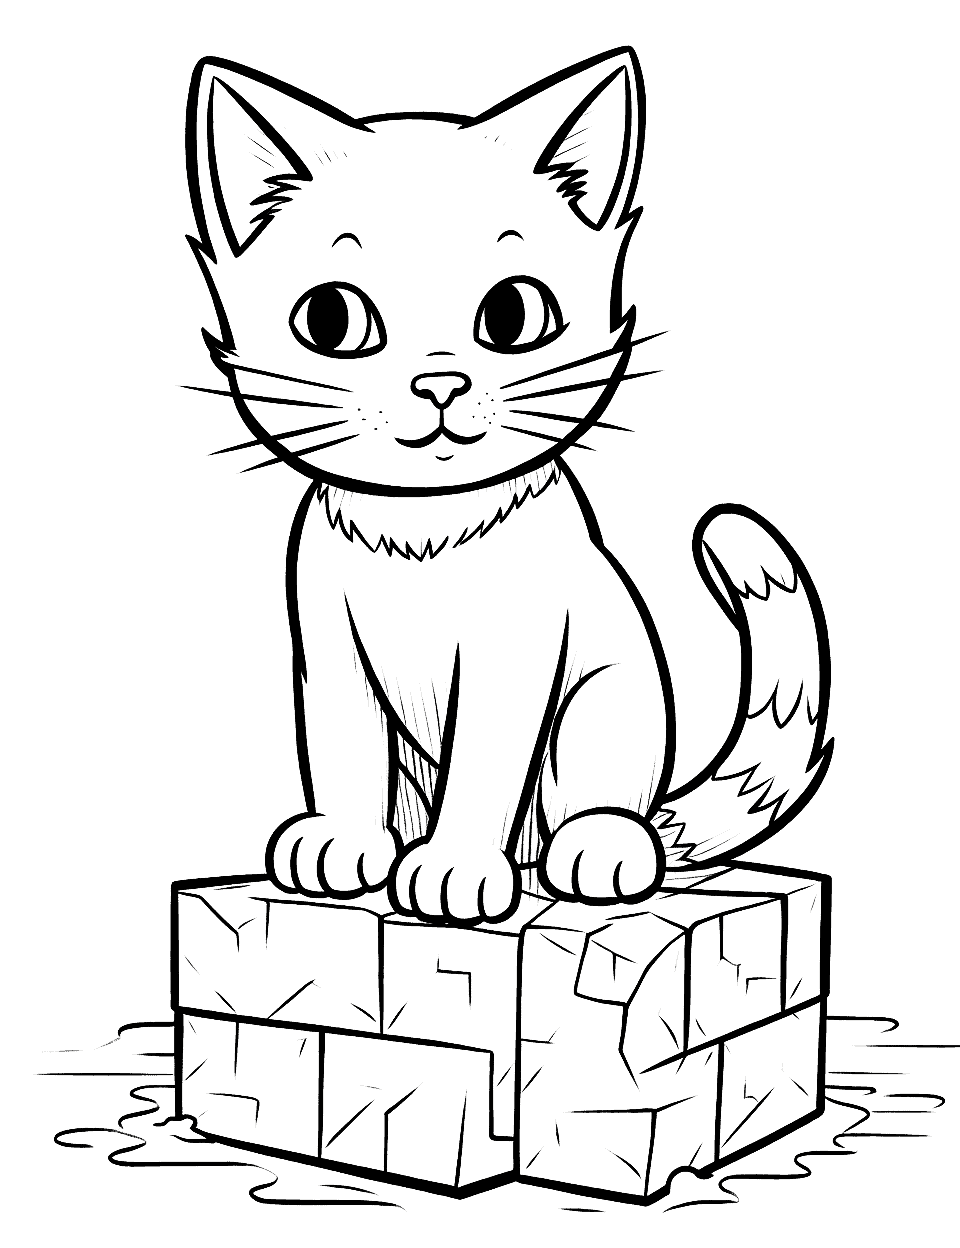 Cat on a Diamond Hunt Coloring Page - A Minecraft cat on a daring adventure to hunt for precious diamonds.